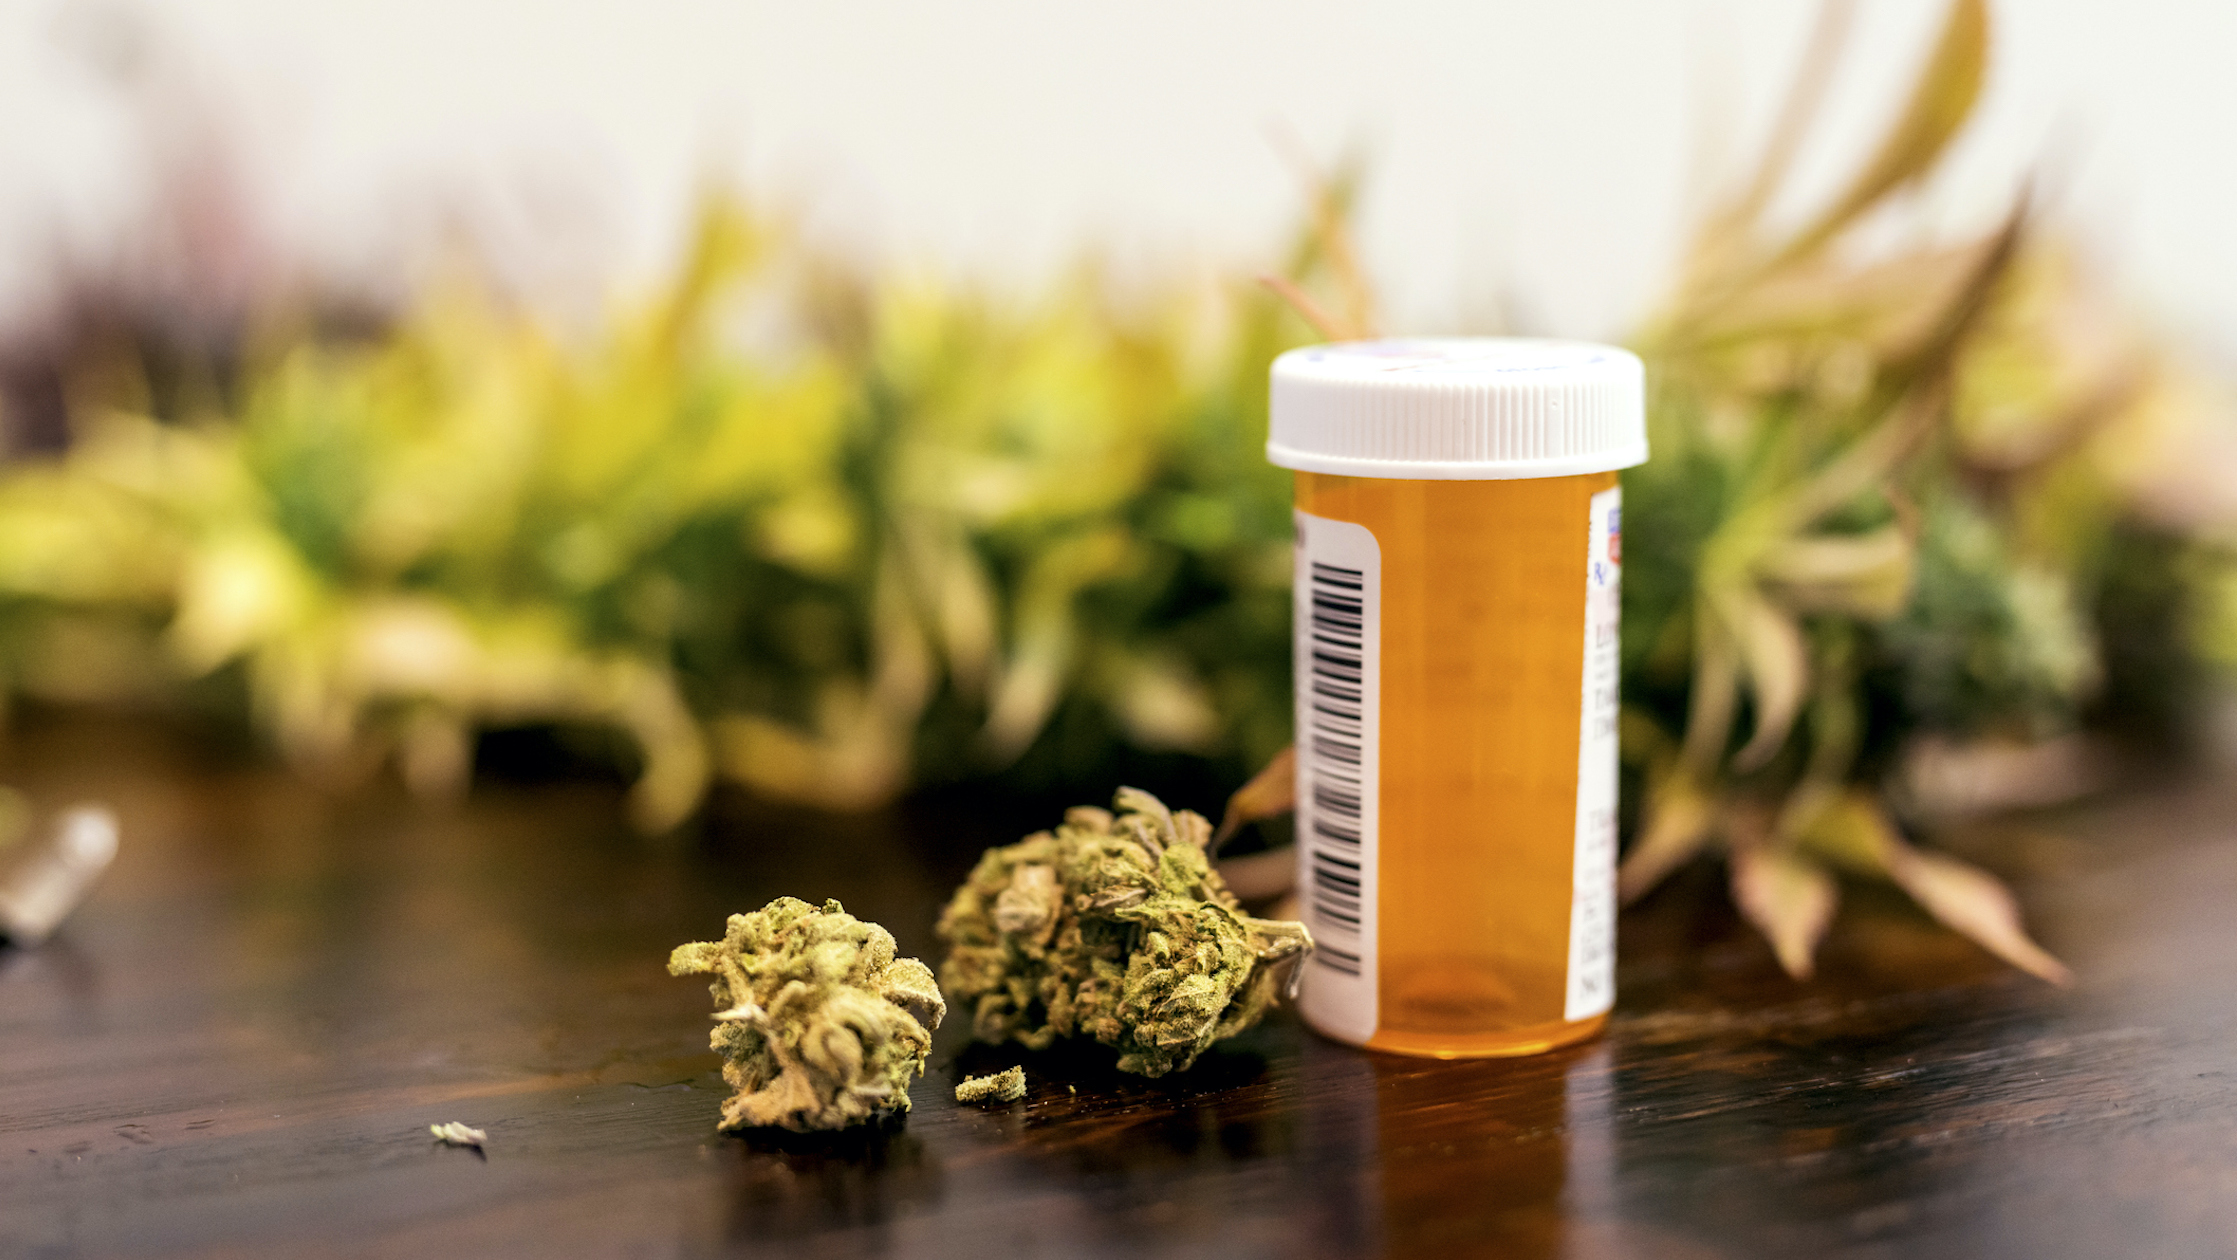 If you are interested in a medical cannabis card, learn about the potential impact recent statements from the Louisiana attorney general could have.